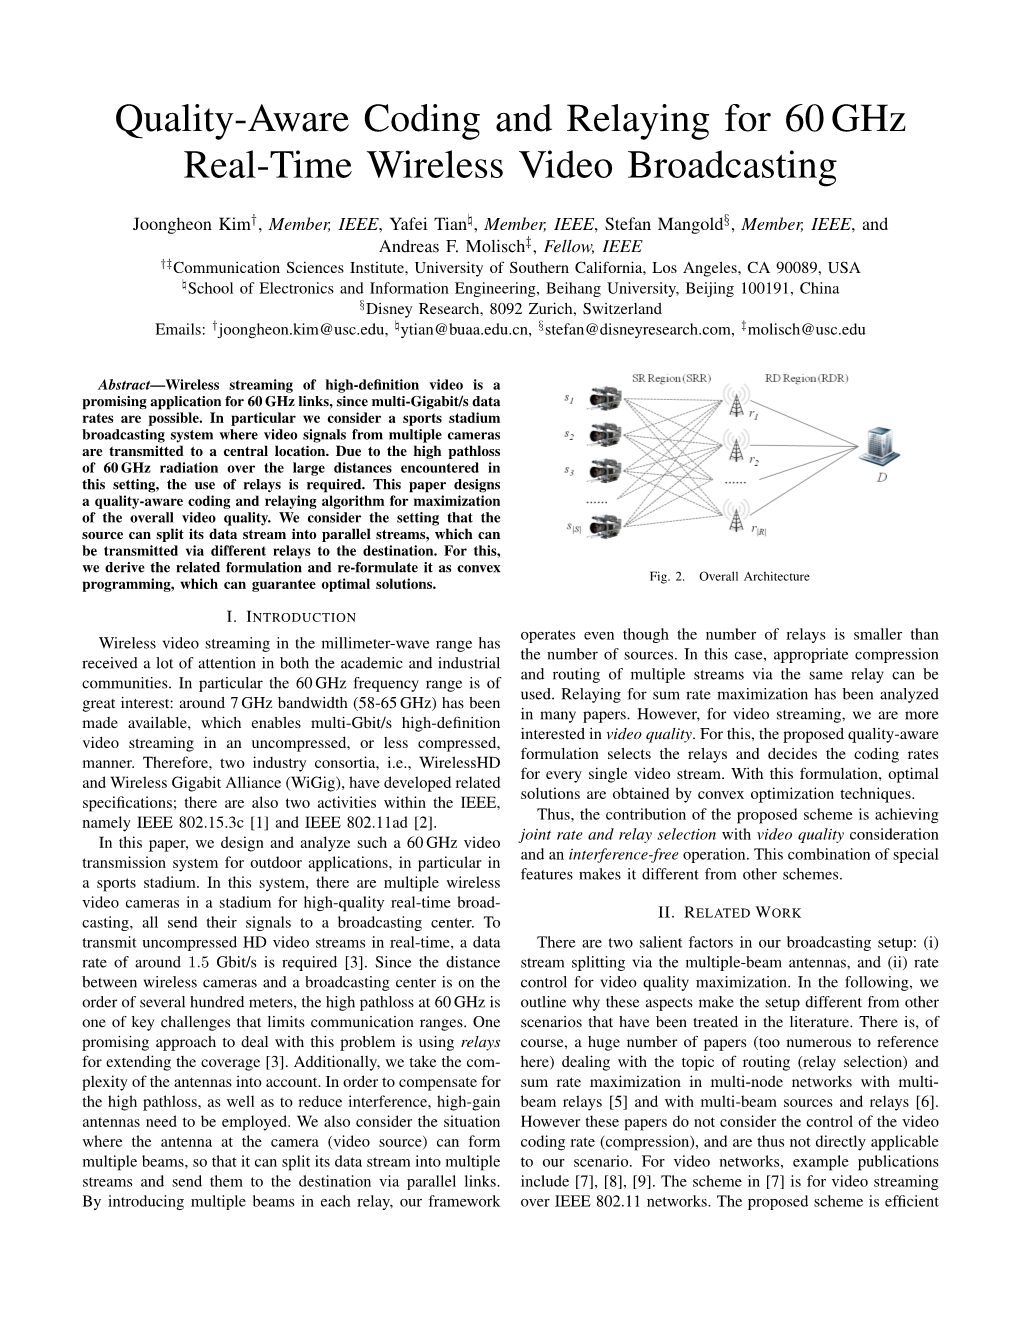 Quality-Aware Coding and Relaying for 60Ghz Real-Time Wireless Video Broadcasting